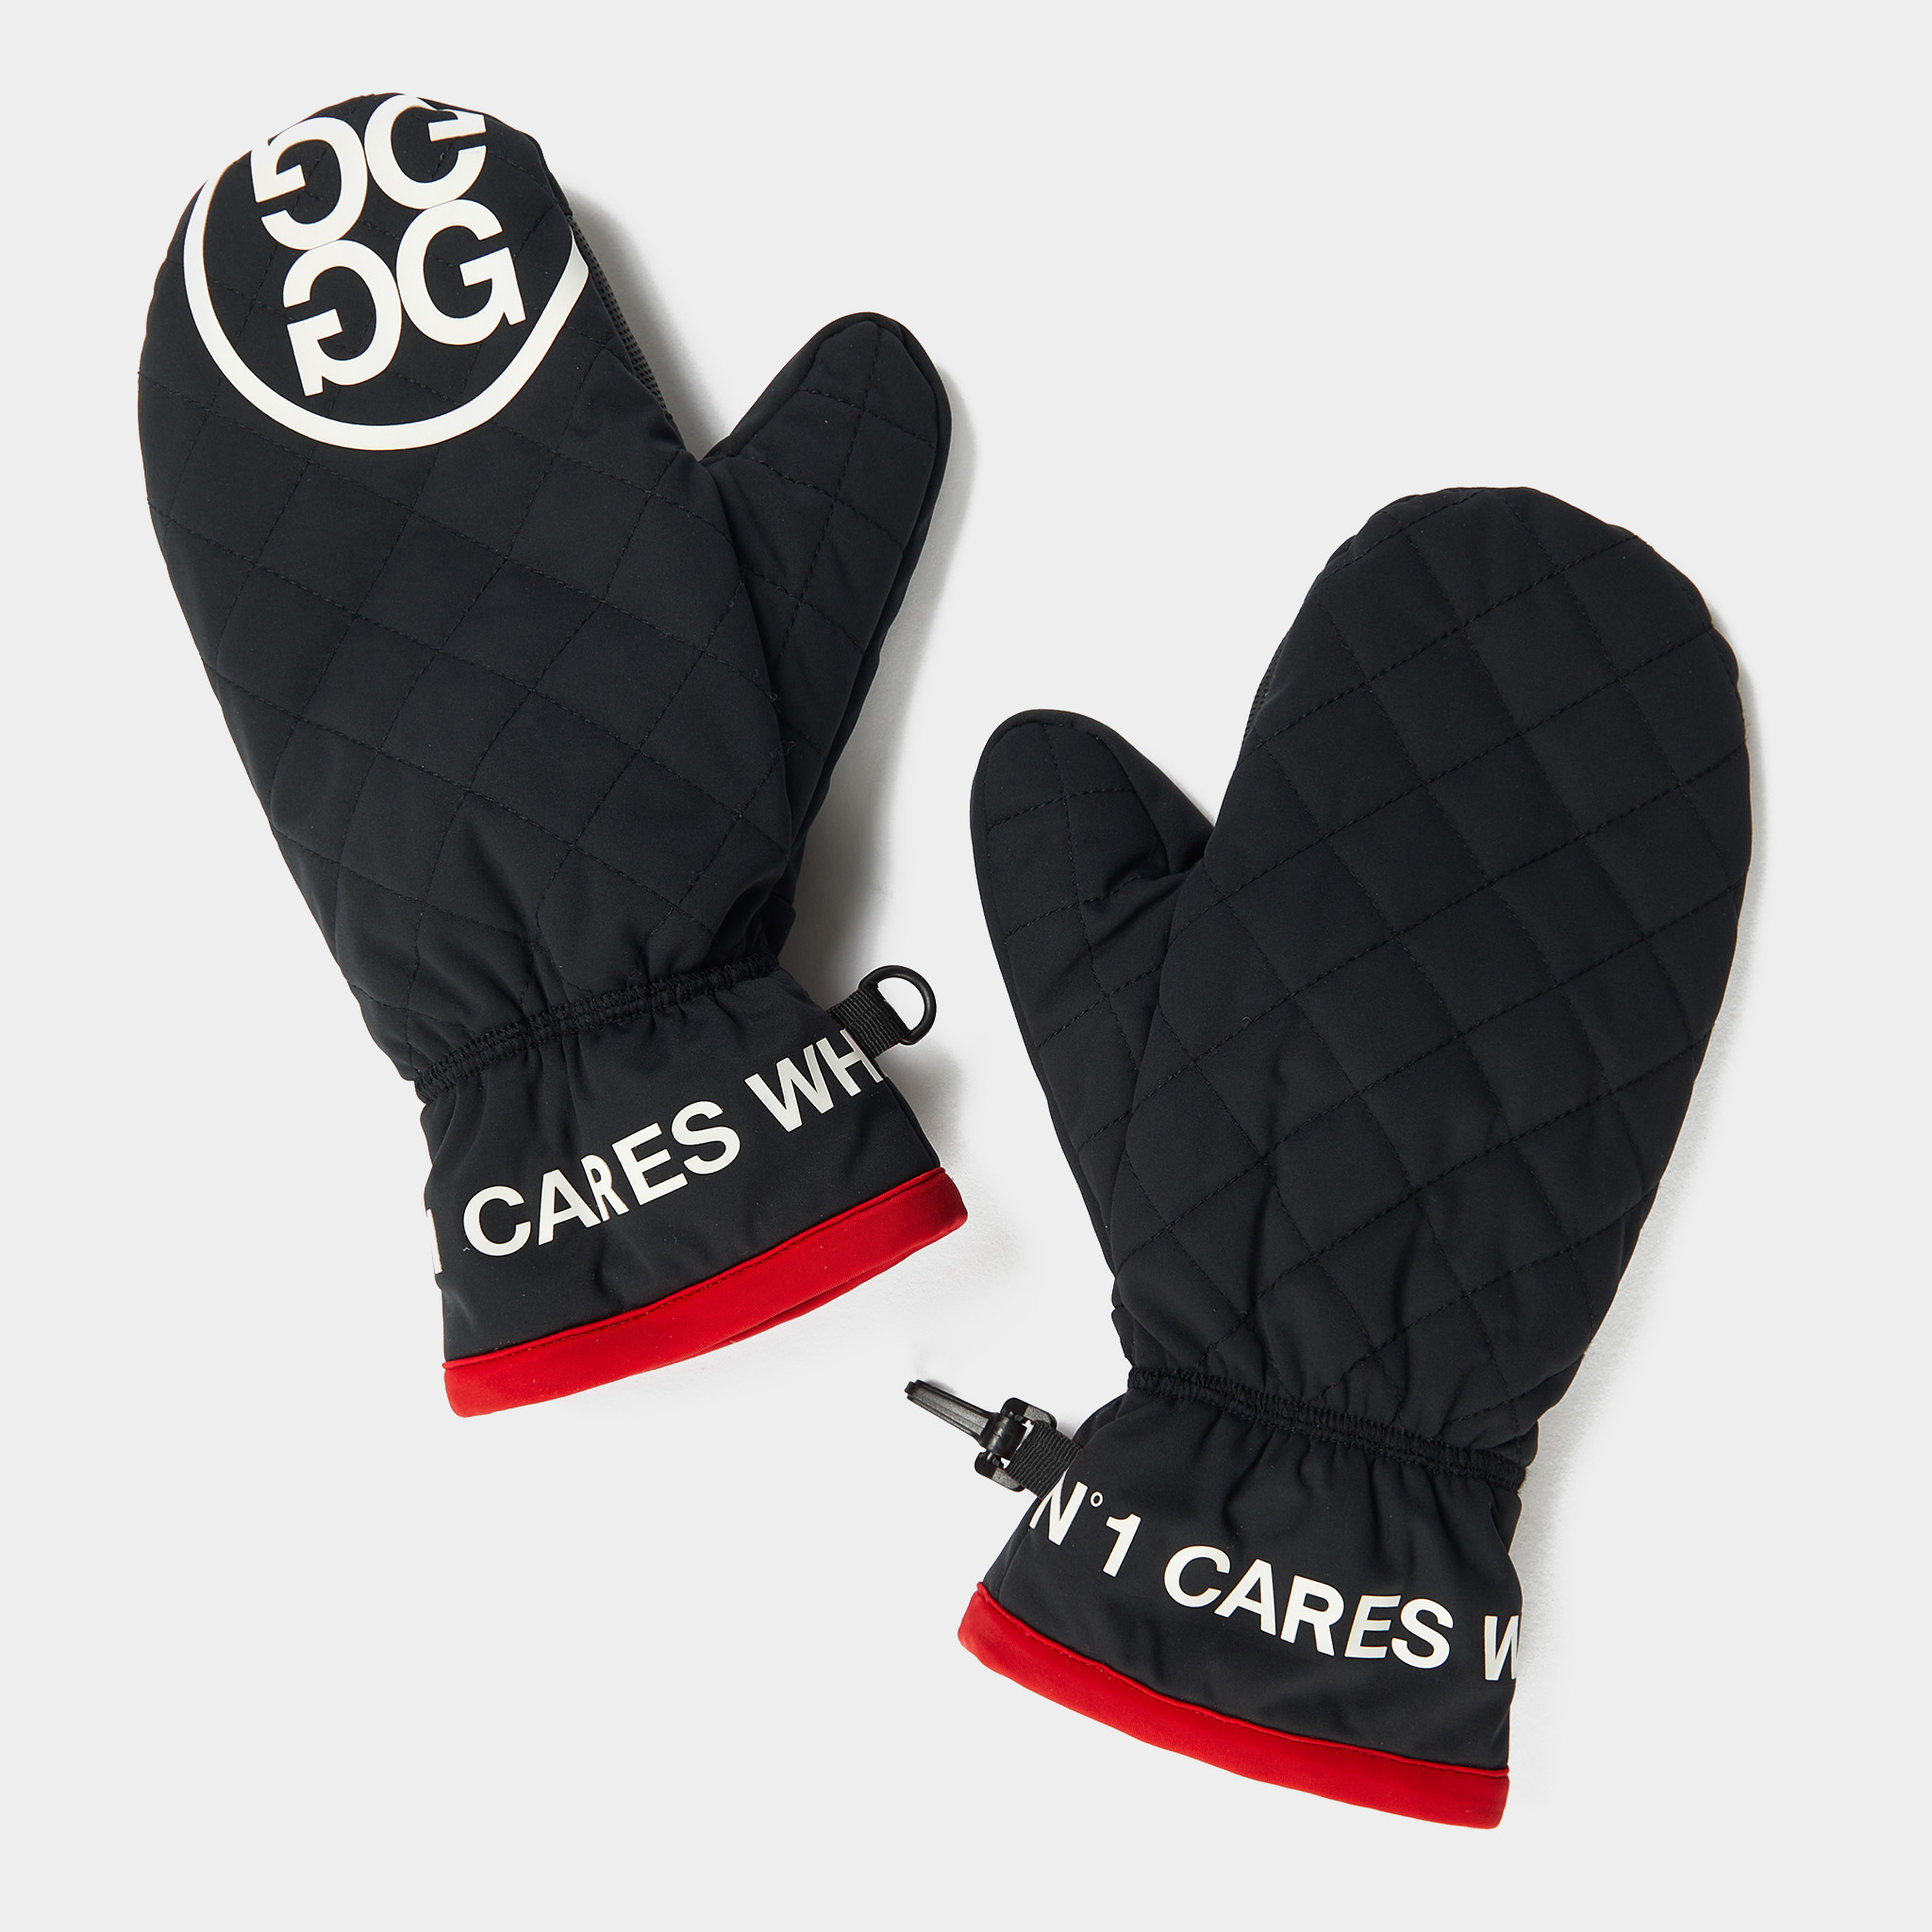 NO 1 CARES WHAT YOU SHOT WOOL LINED MITTENS - G/FORE